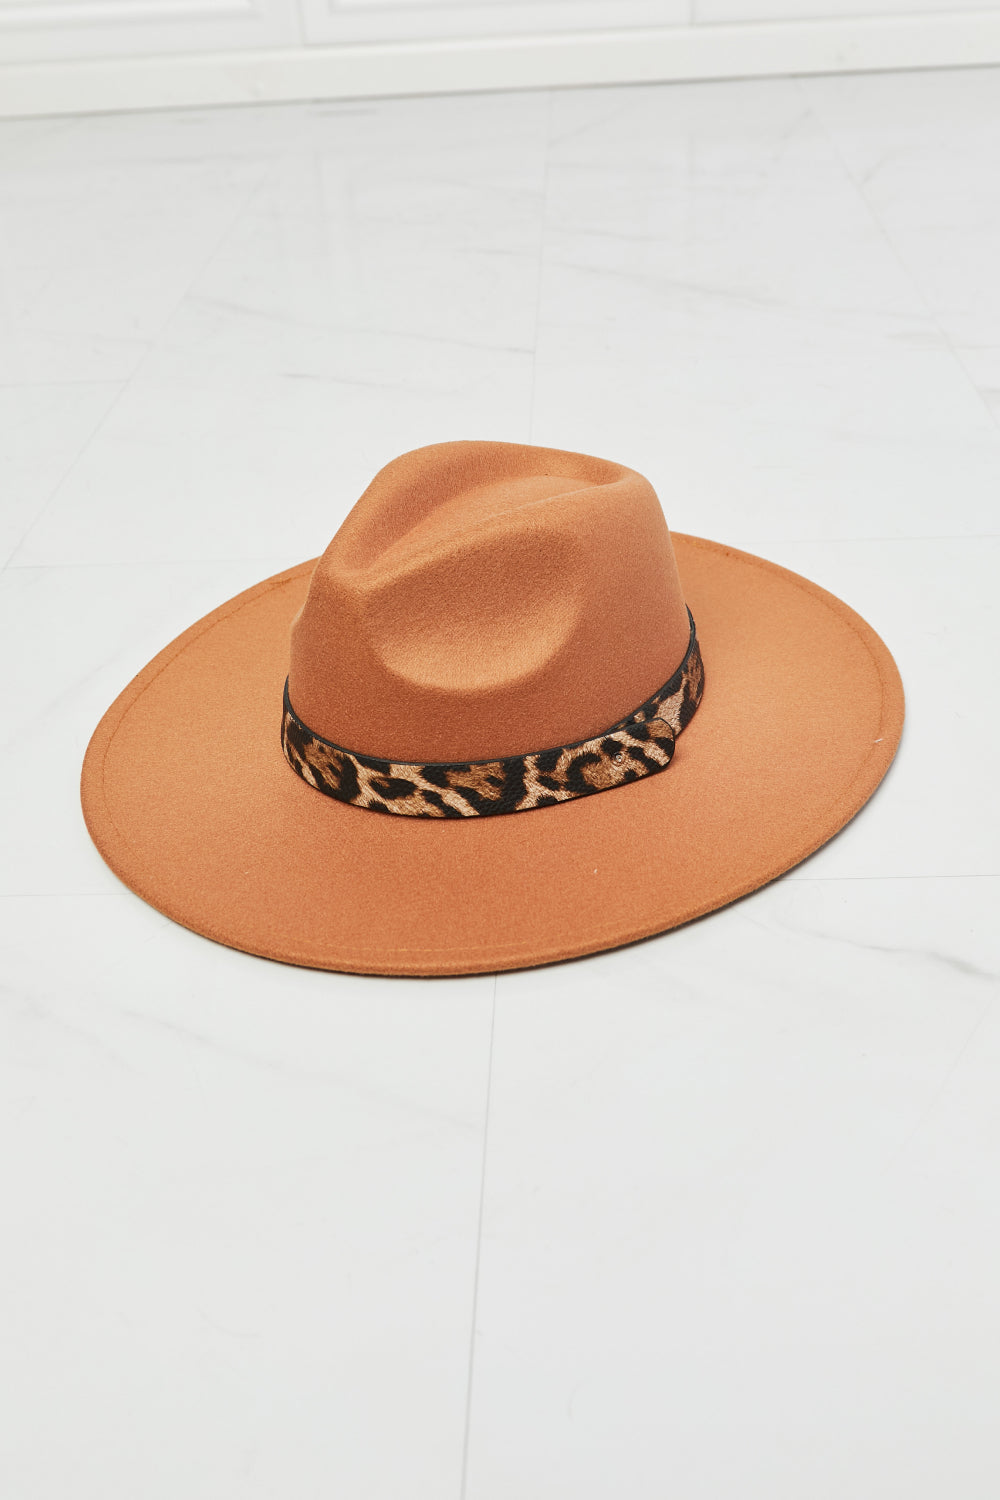 Fame In The Wild Leopard Detail Fedora Hat - Hats - FITGGINS